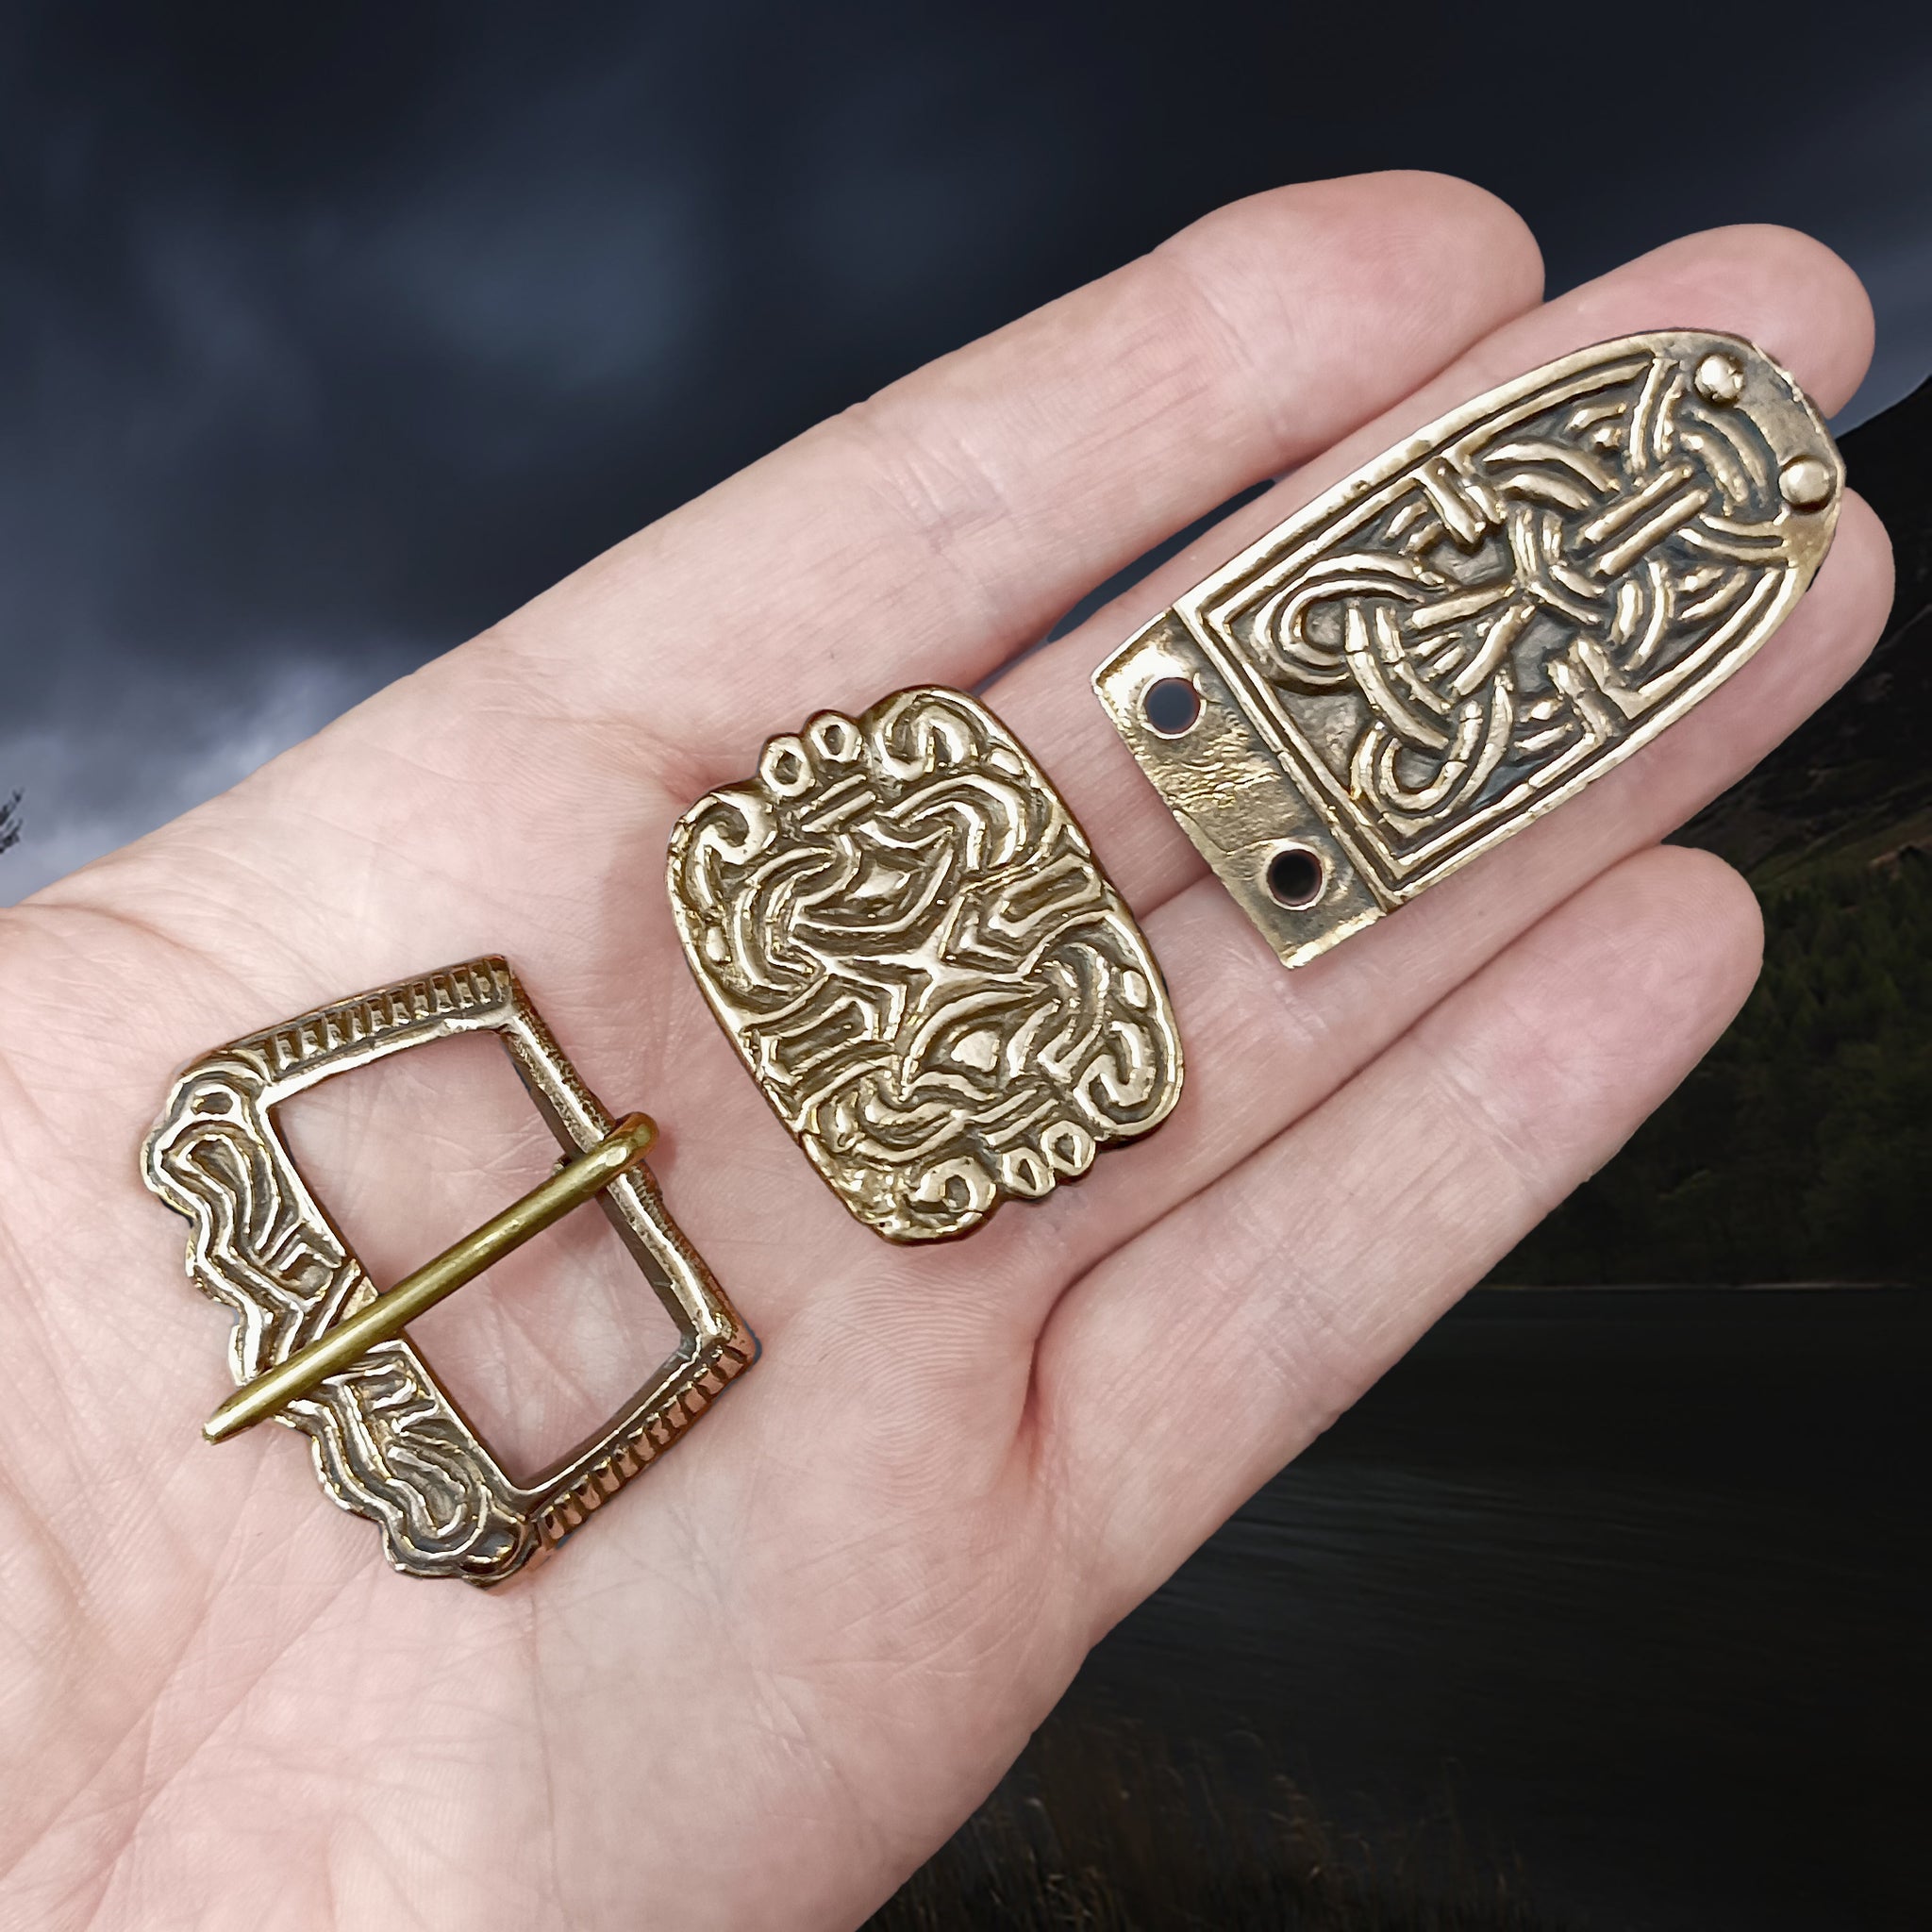 Replica Viking Buckle, Strap End &amp; Slider in Solid Bronze in the Norwegian Borre Style on Hand